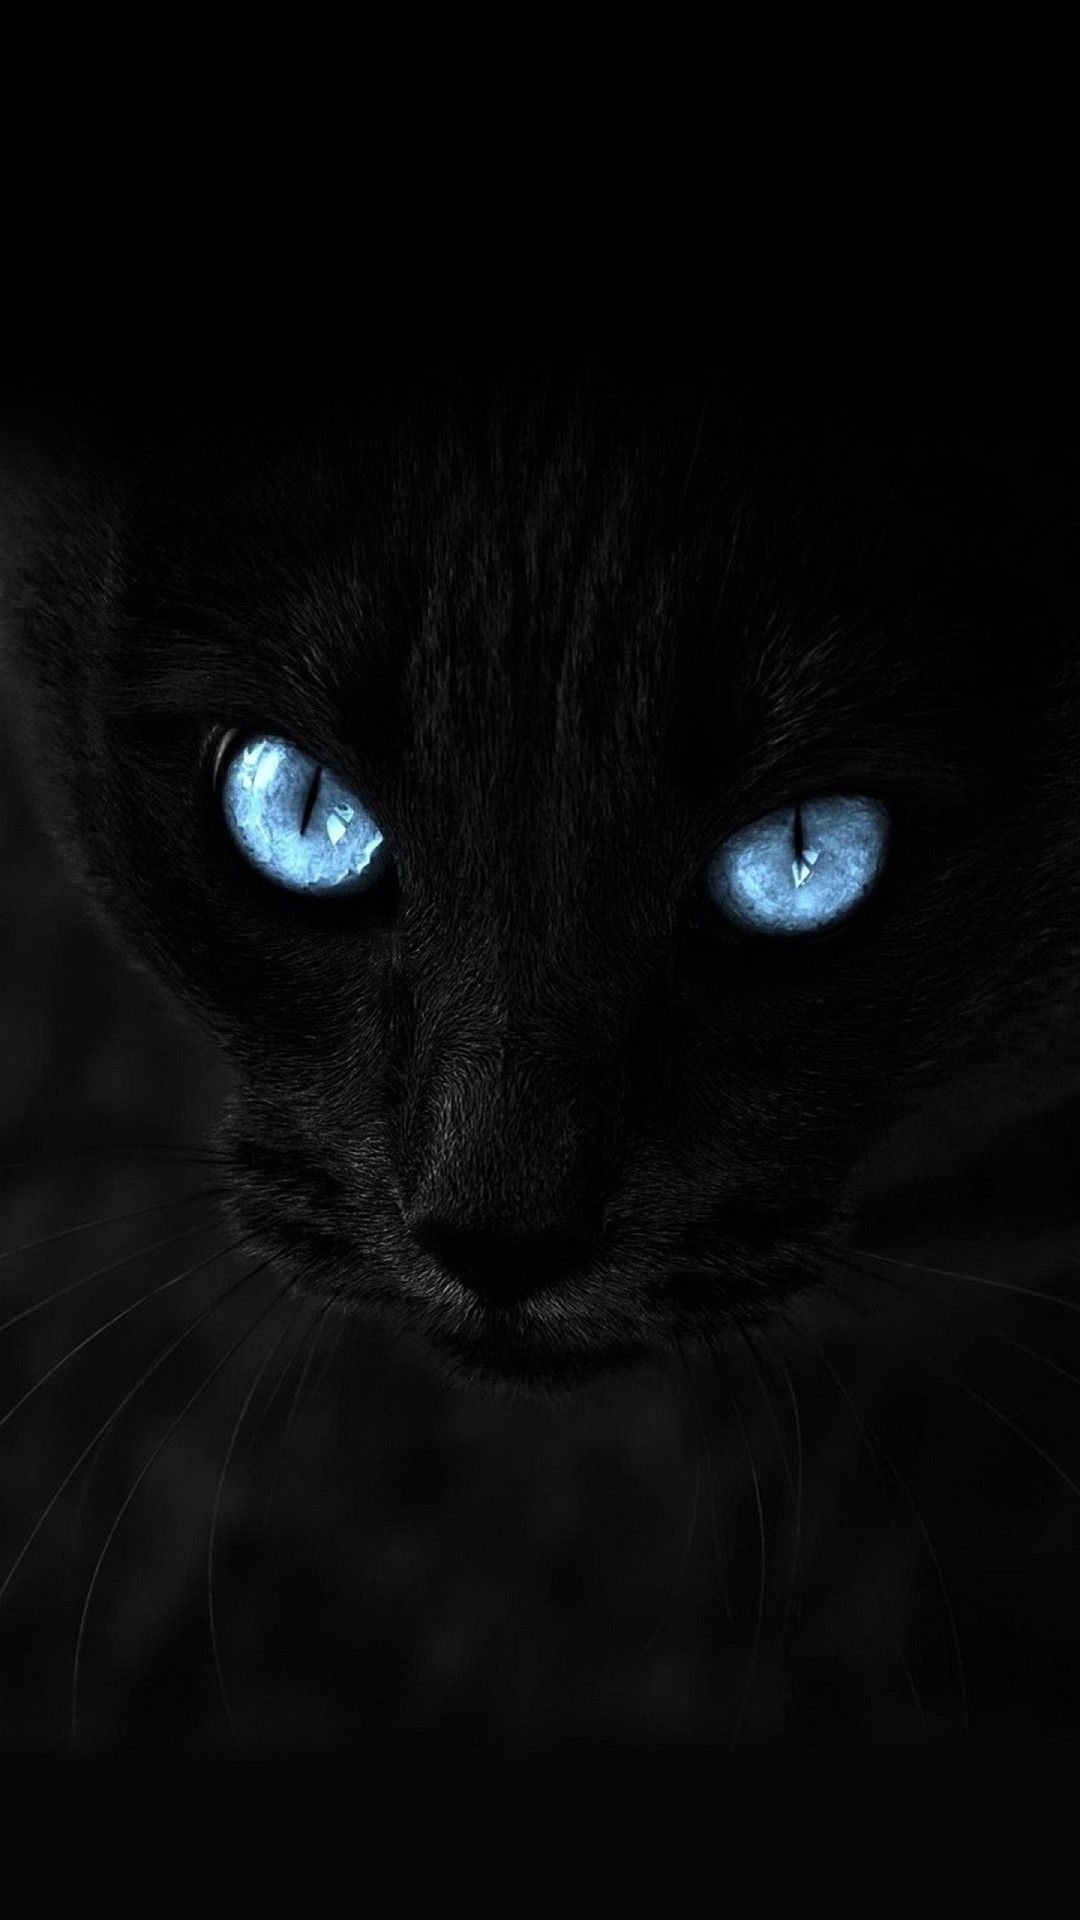 Wallpaper Iphone 6 Plus Cat Blue Eyes 5 5 Inches - 1080 x 1920 ...